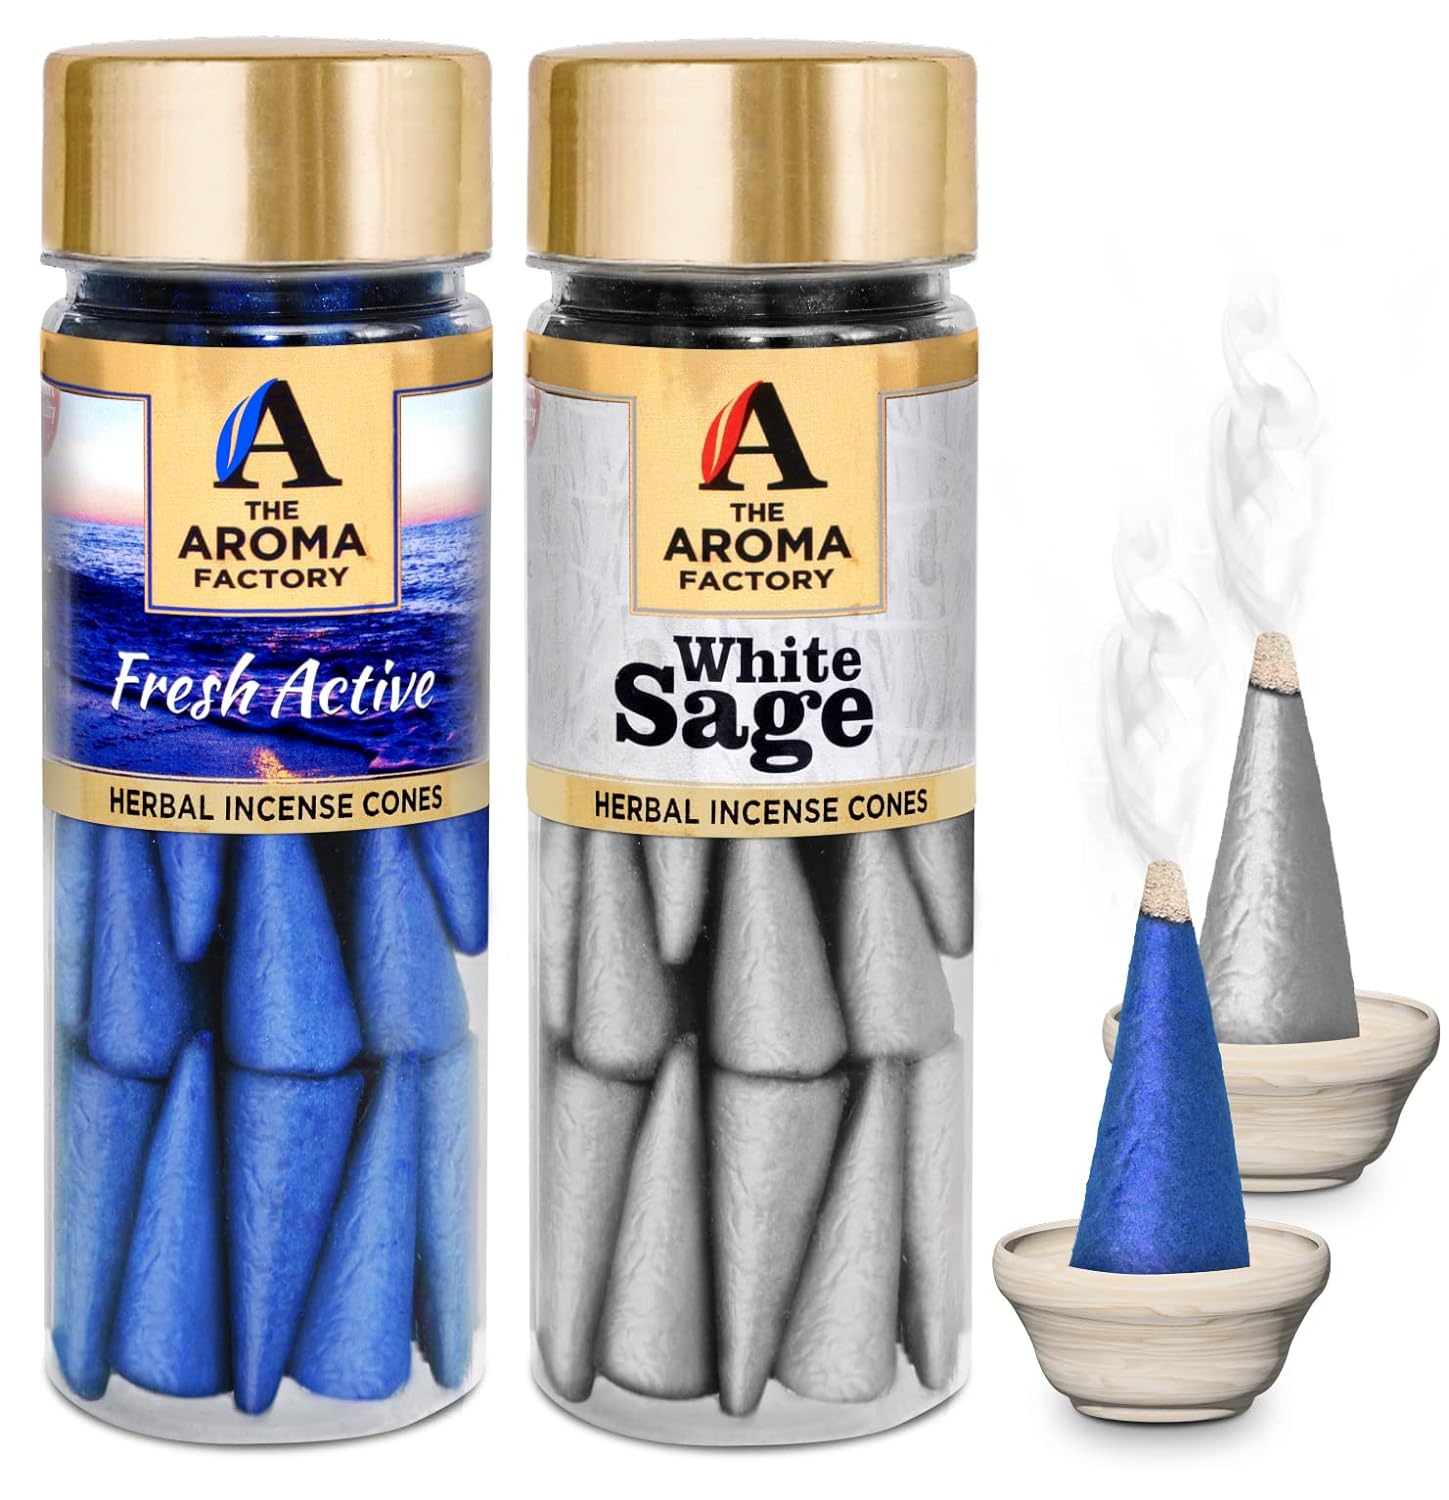 The Aroma Factory Incense Dhoop Cone for Pooja, White Sage & Fresh Active (100% Herbal & 0% Charcoal) 2 Bottles x 30 Cones